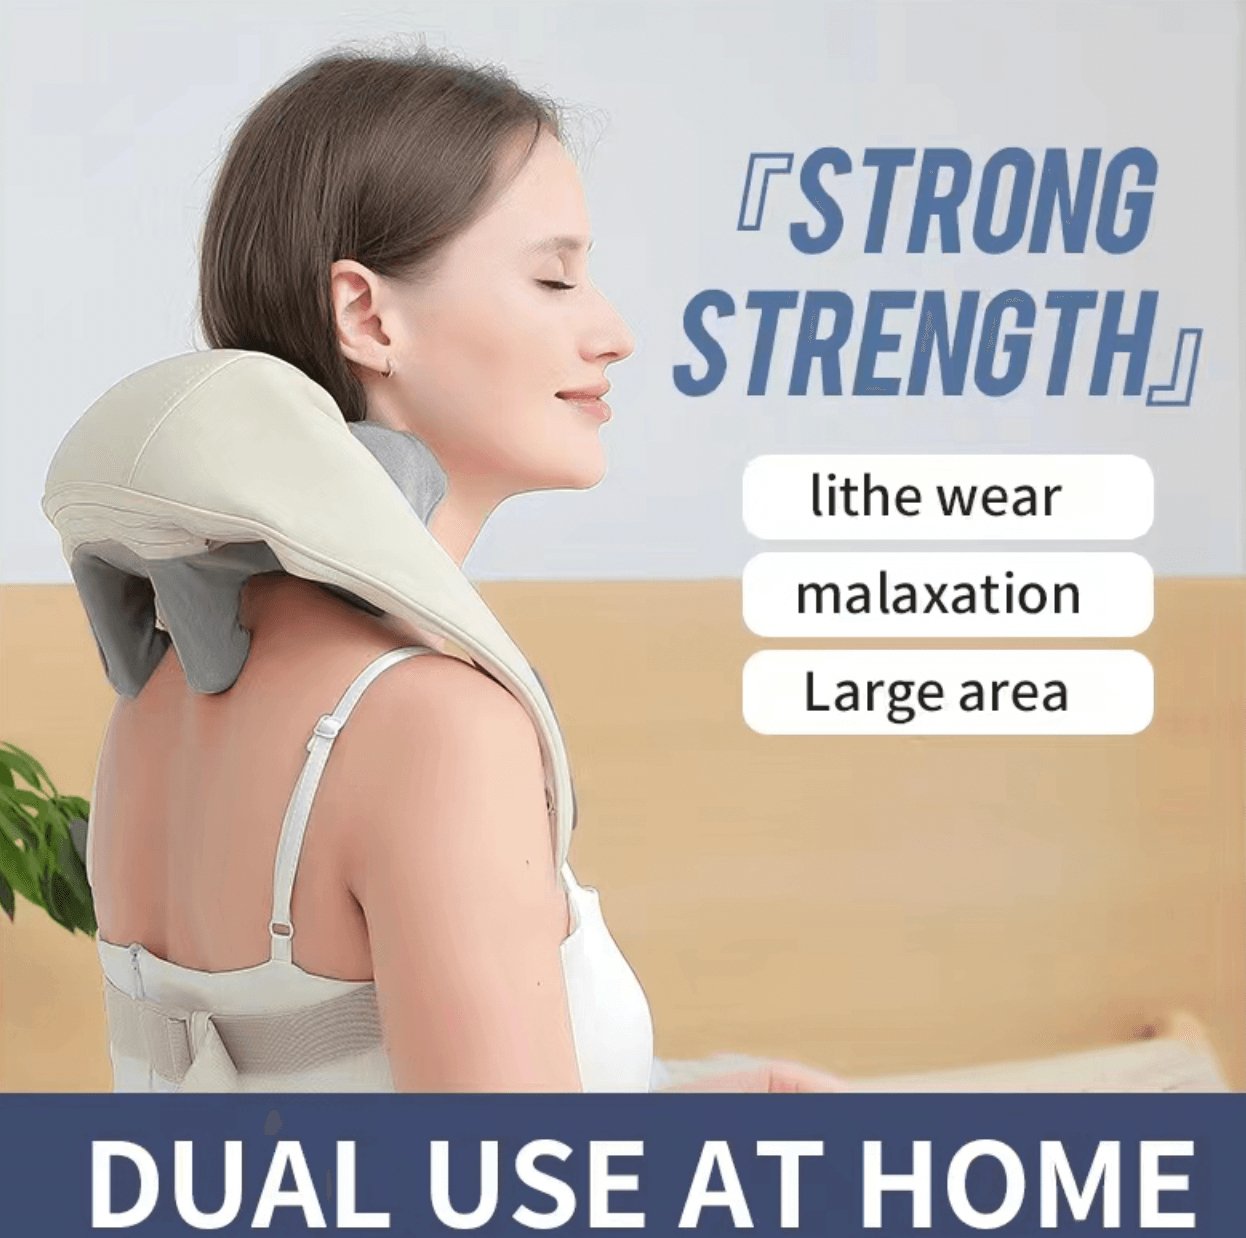 Back Massager with Heat, Neck and Back Massager for Pain Relief